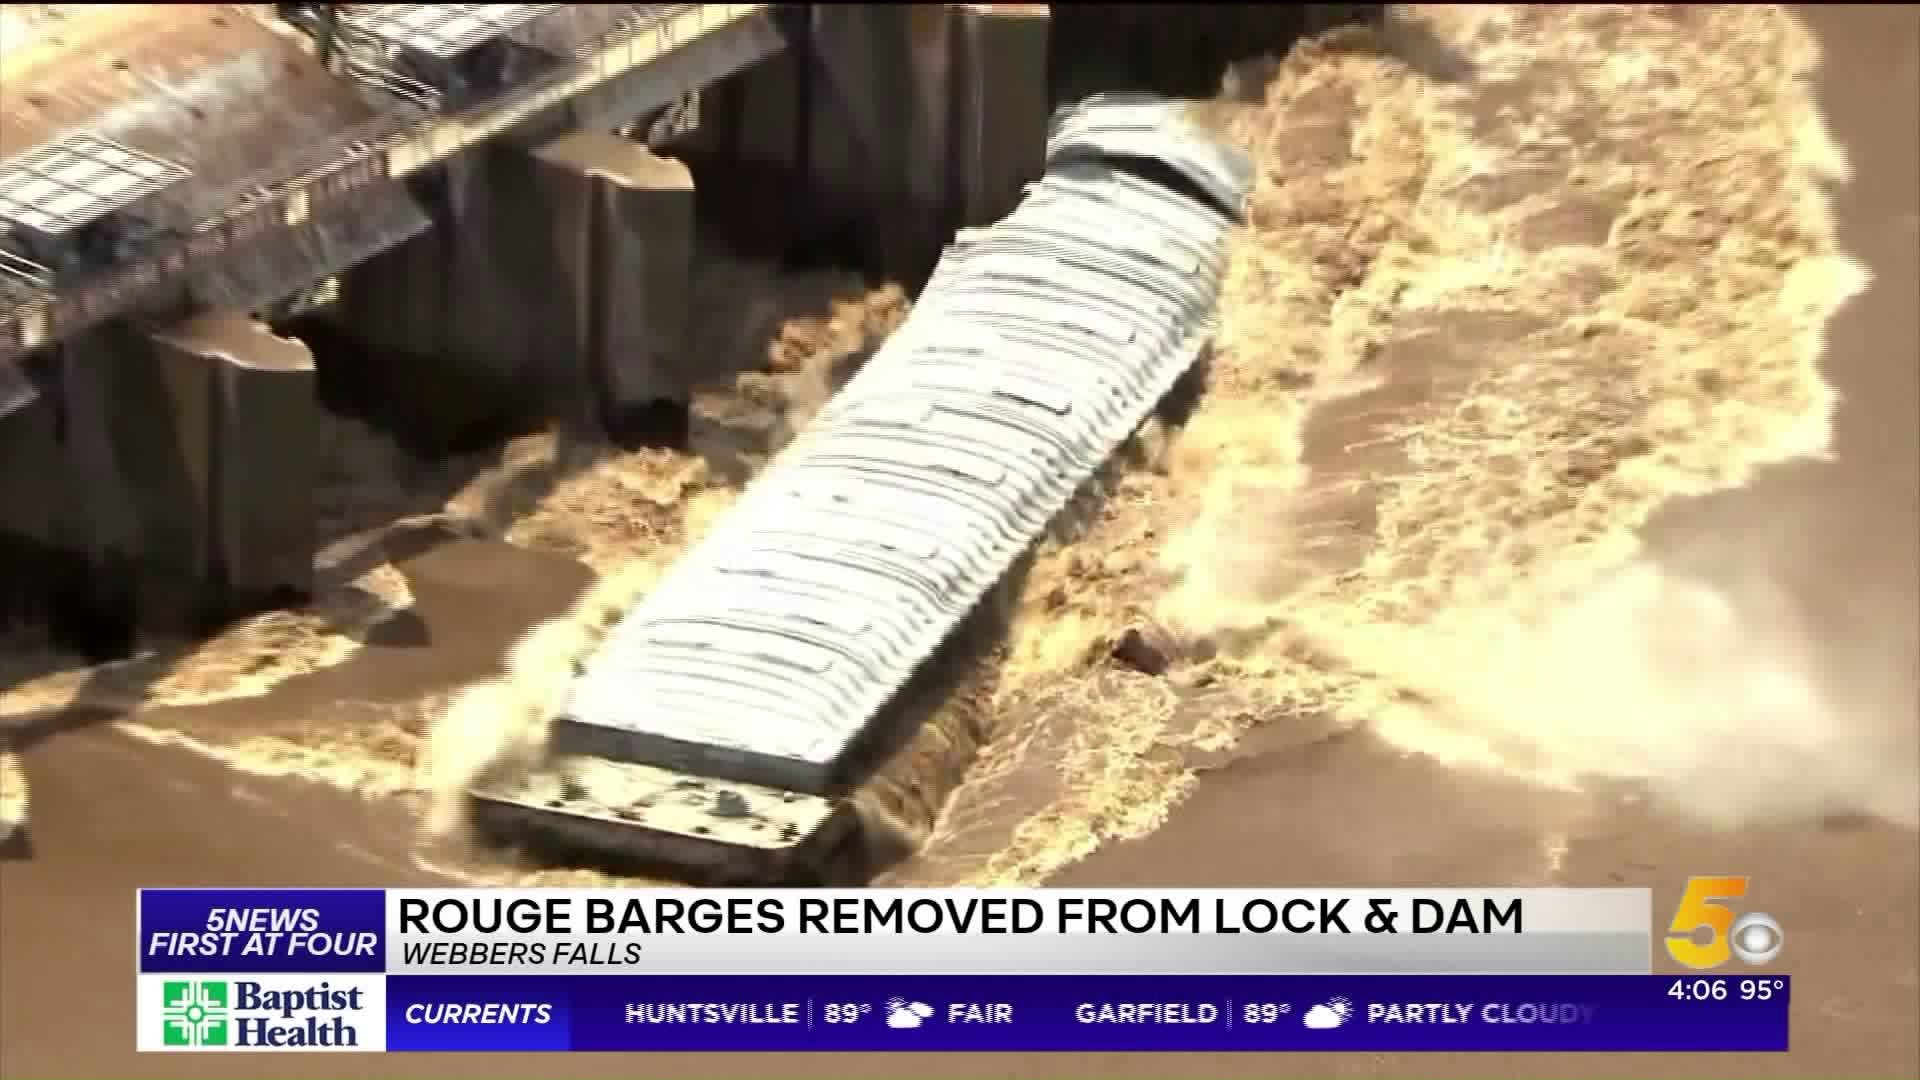 Last Of Two Runaway Barges Lifted From Oklahoma Lock And Dam